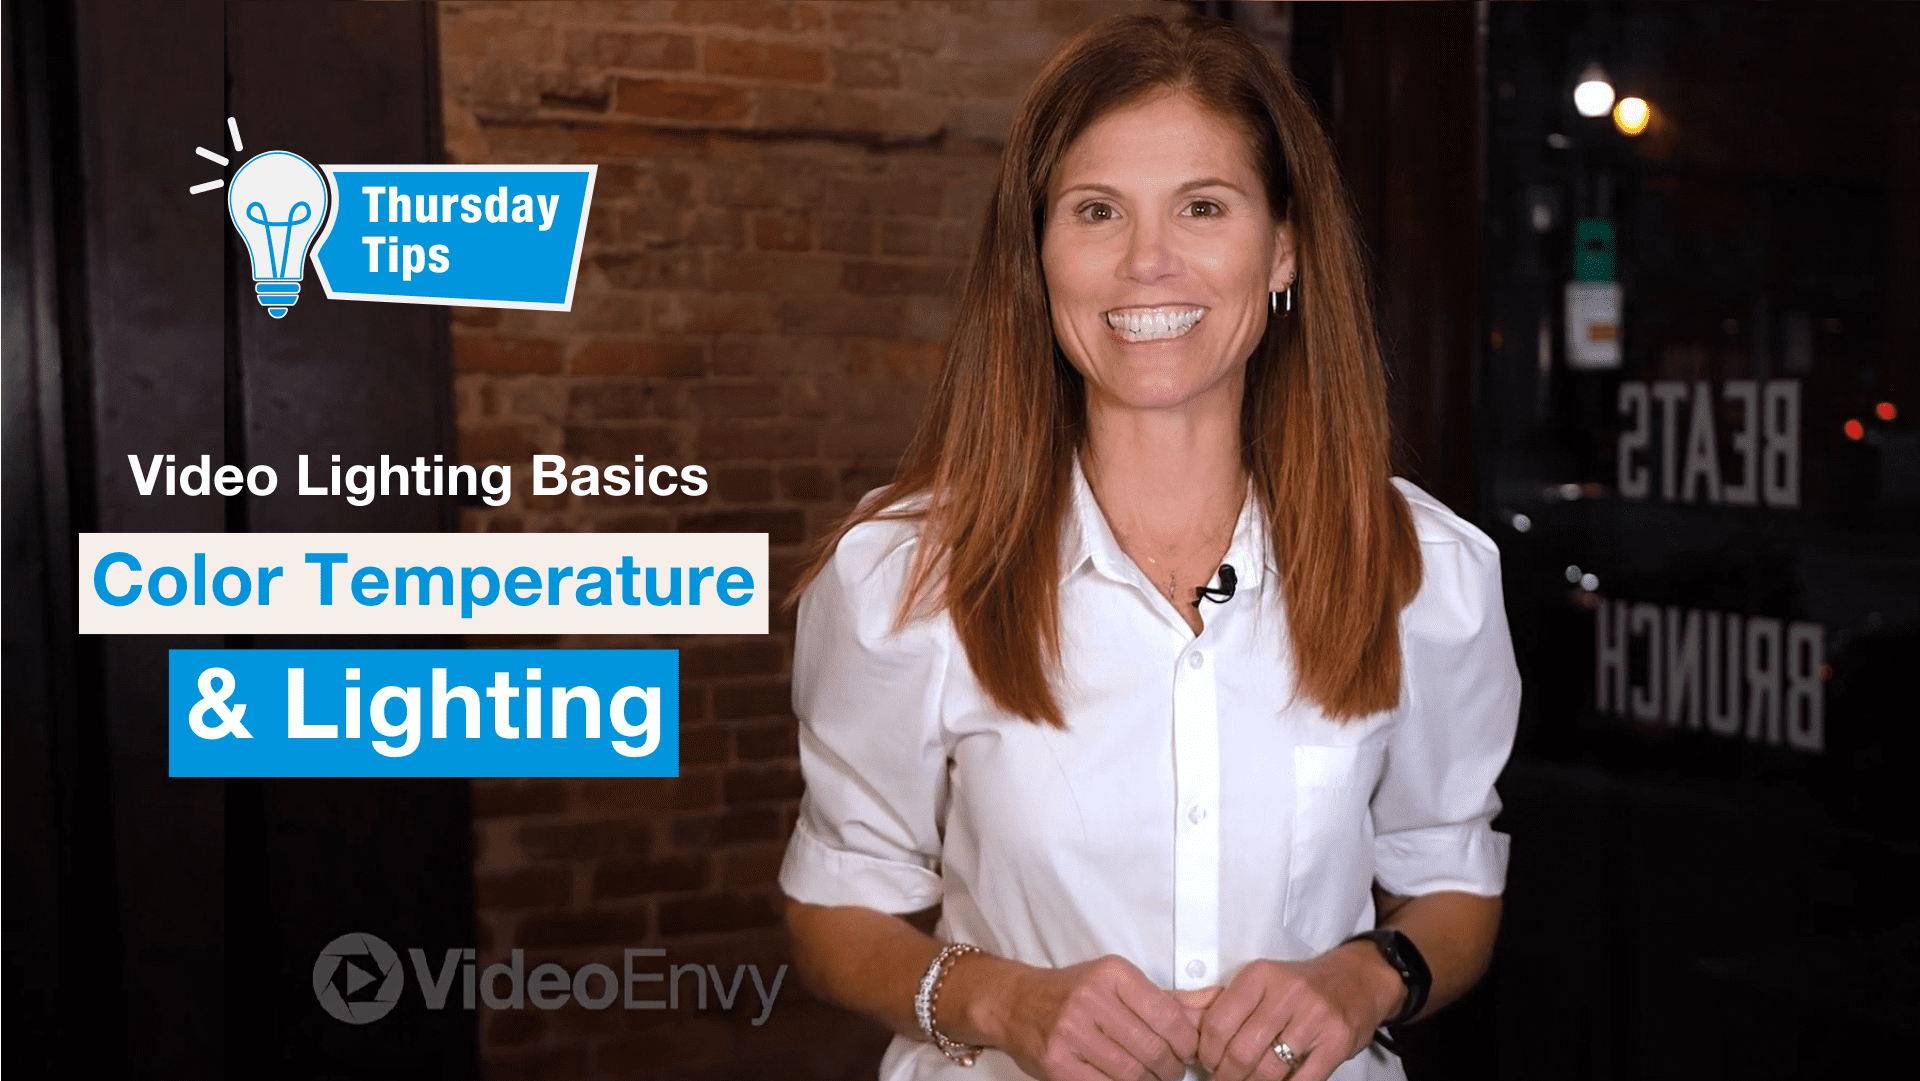 Thursday Tips: Color Temperatures in Video Lighting